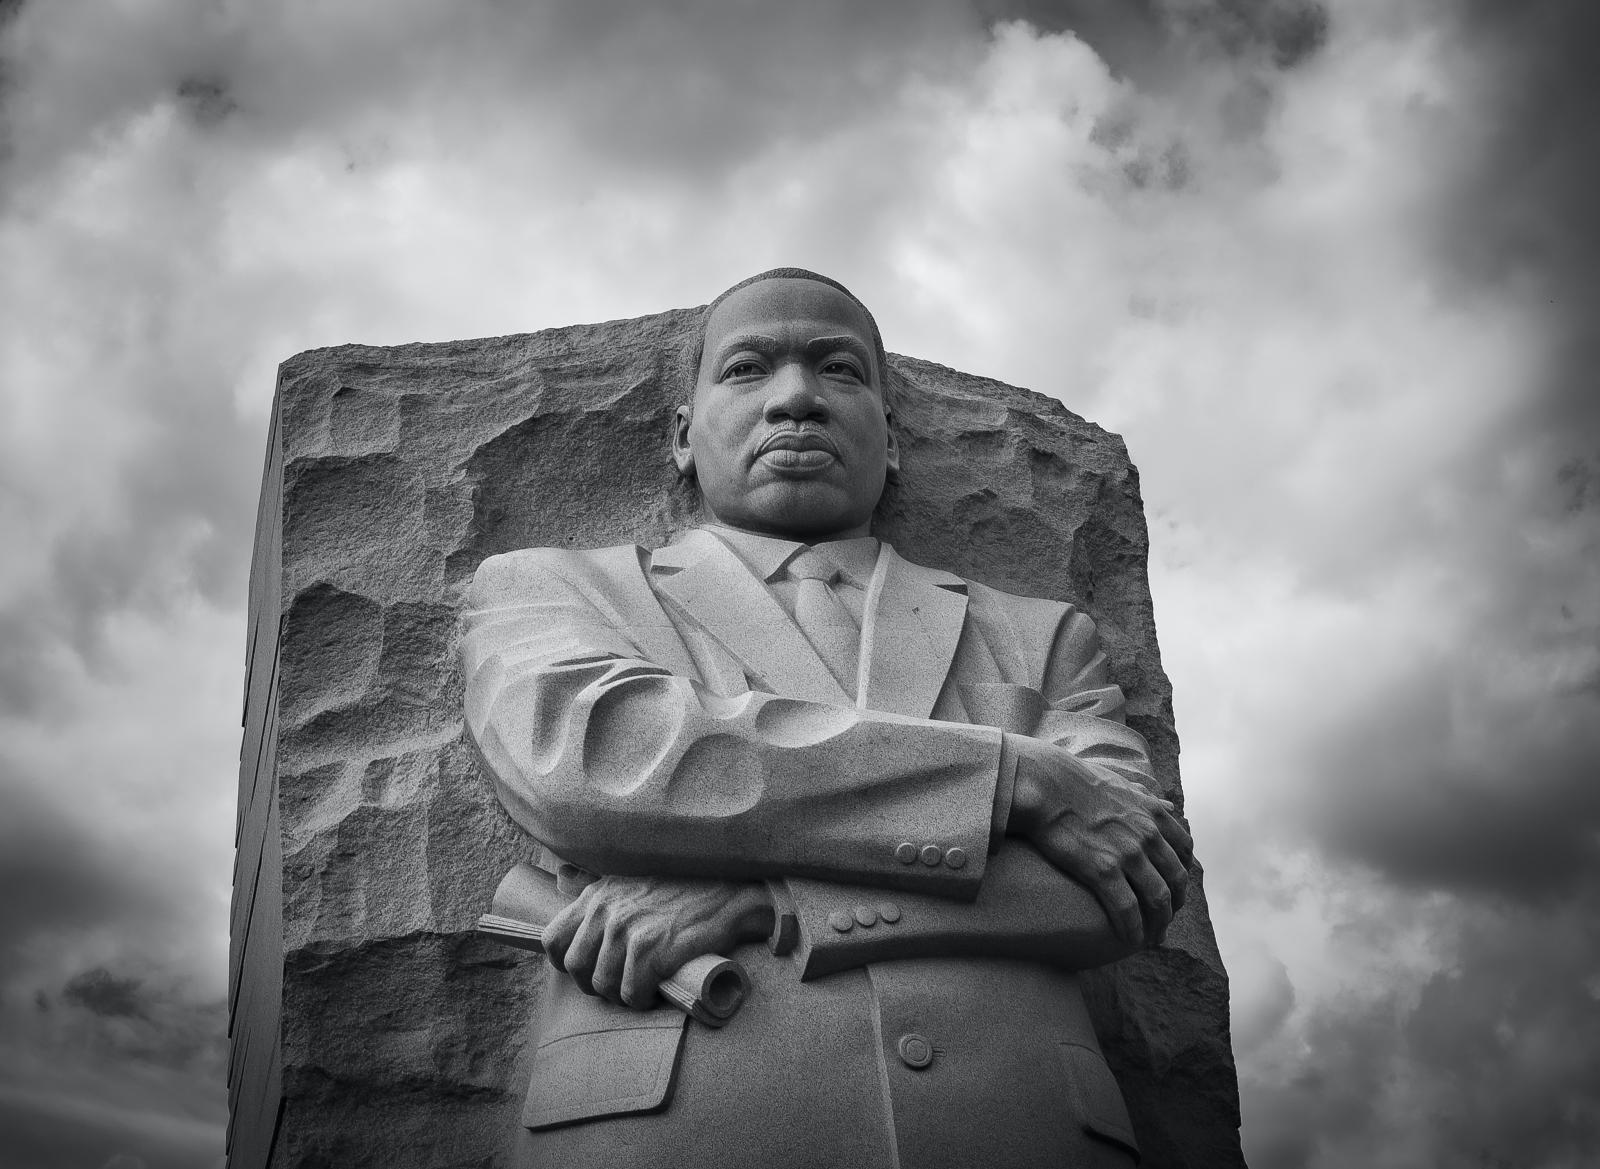 Image of Dr. Martin Luther King Jr. Memorial in Washington D.C.